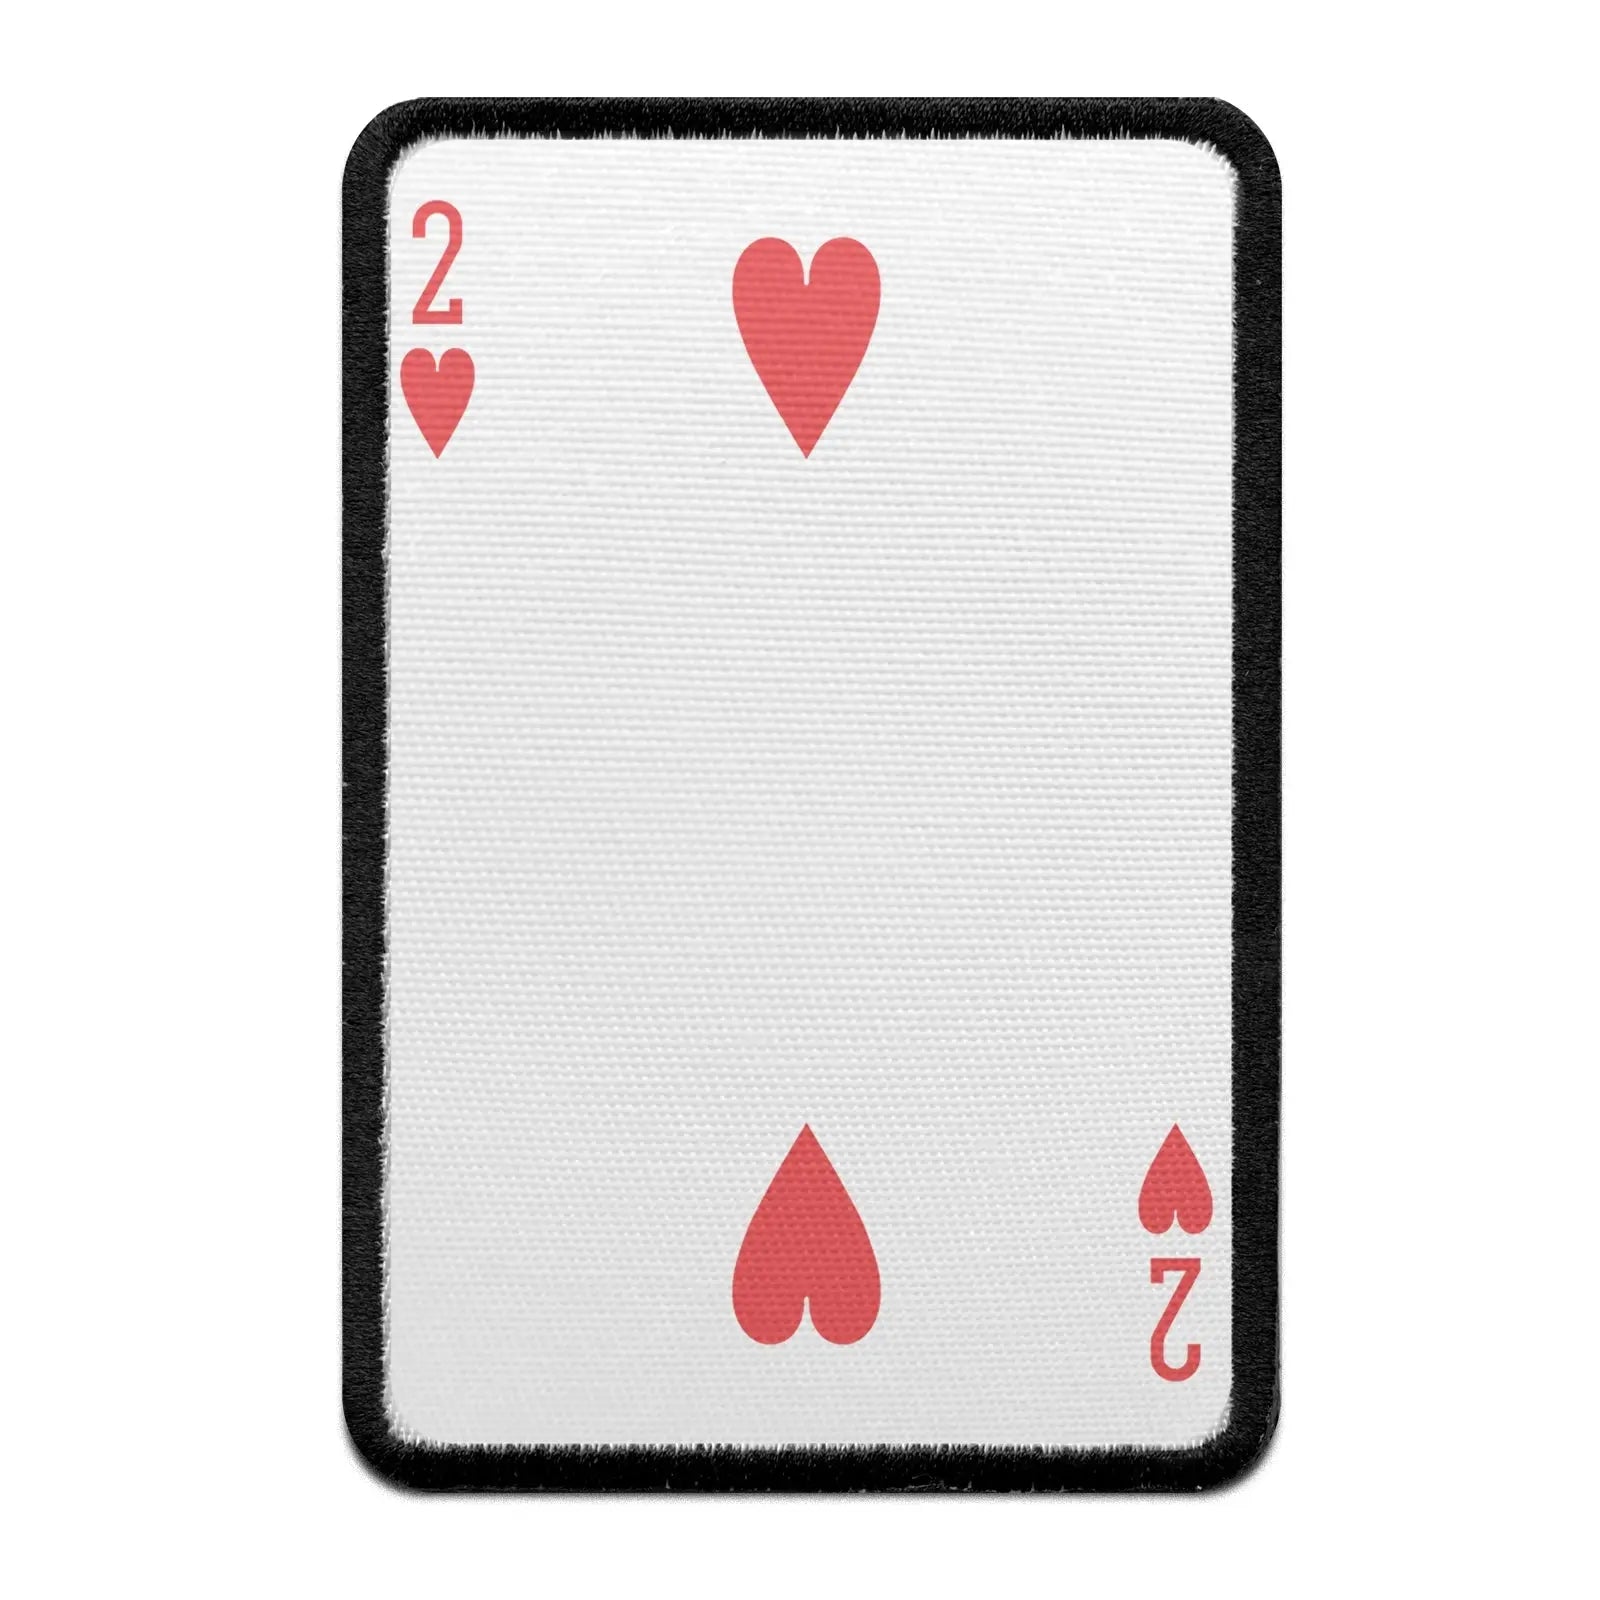 Two Of Hearts Card FotoPatch Game Deck Embroidered Iron On 